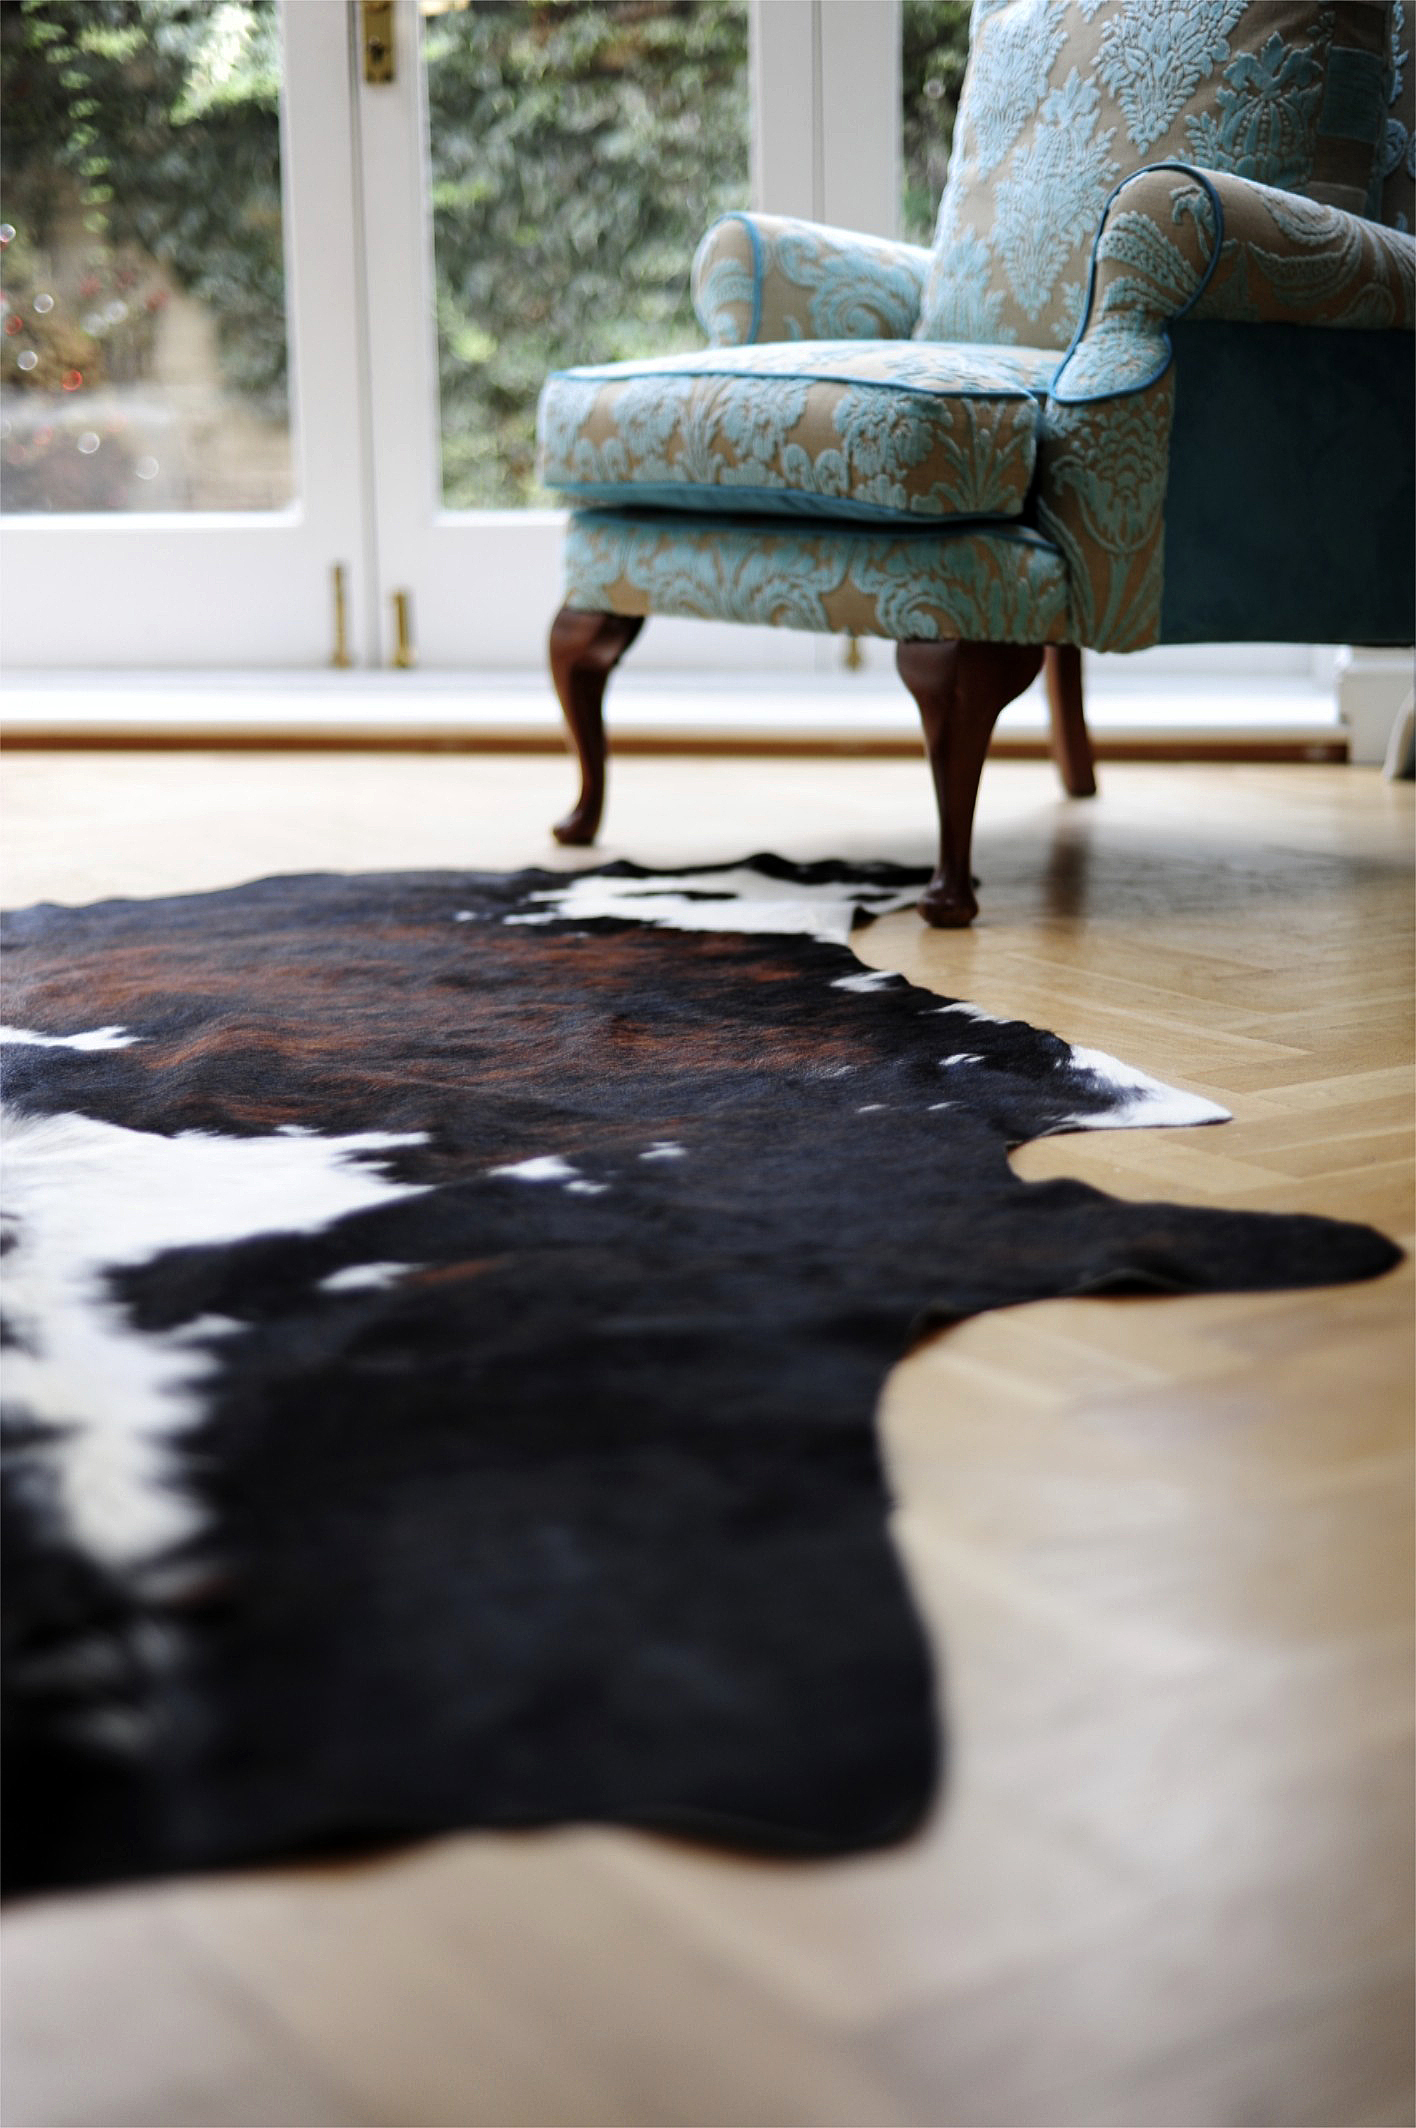 Create A New Look With An Animal Skin Rug - City Cows